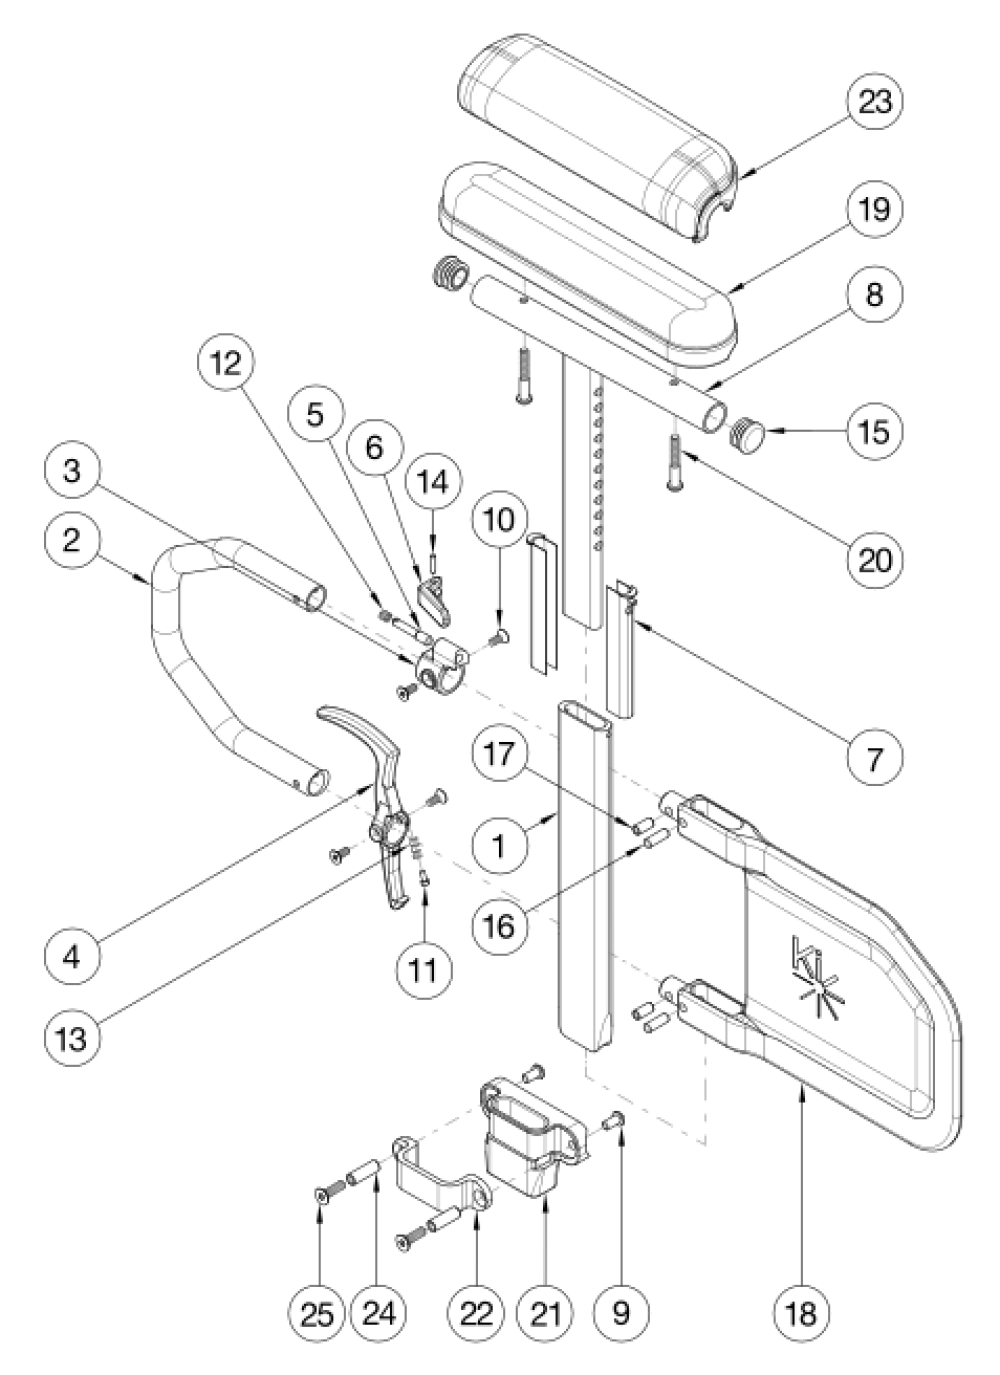 Catalyst Armrests - Height Adjustable Tall T-arm parts diagram